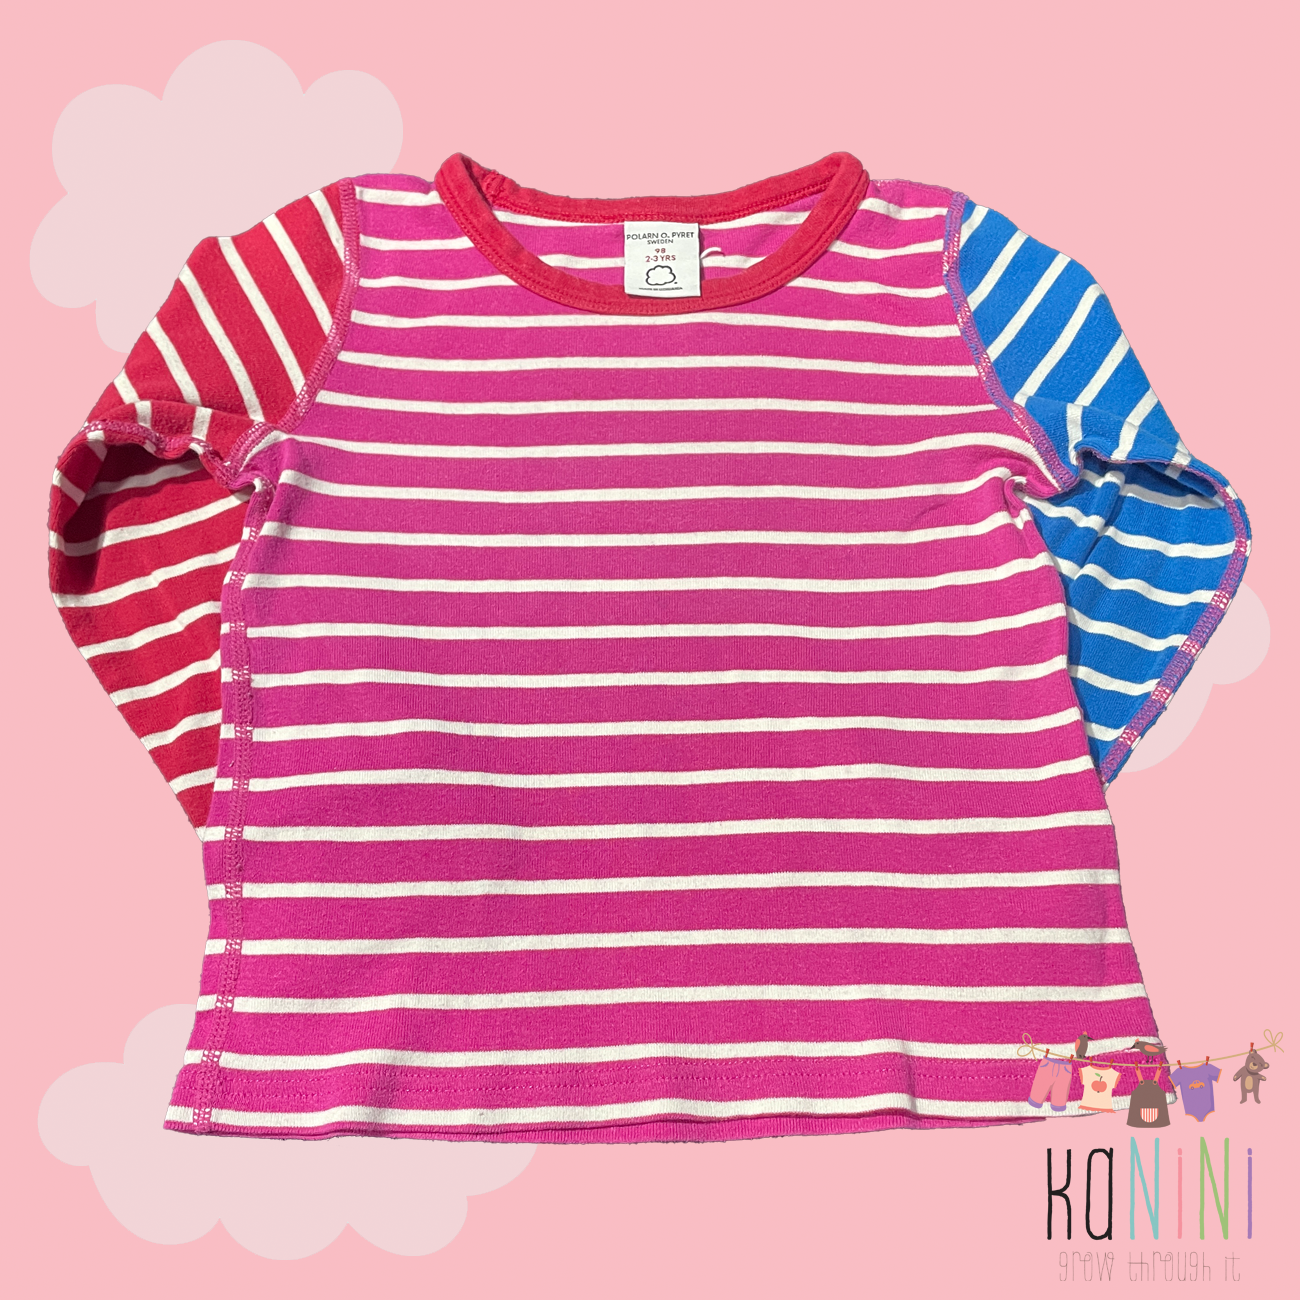 Featured image for “Polarn O Pyret 2 - 3 Years Girls Striped Shirt”